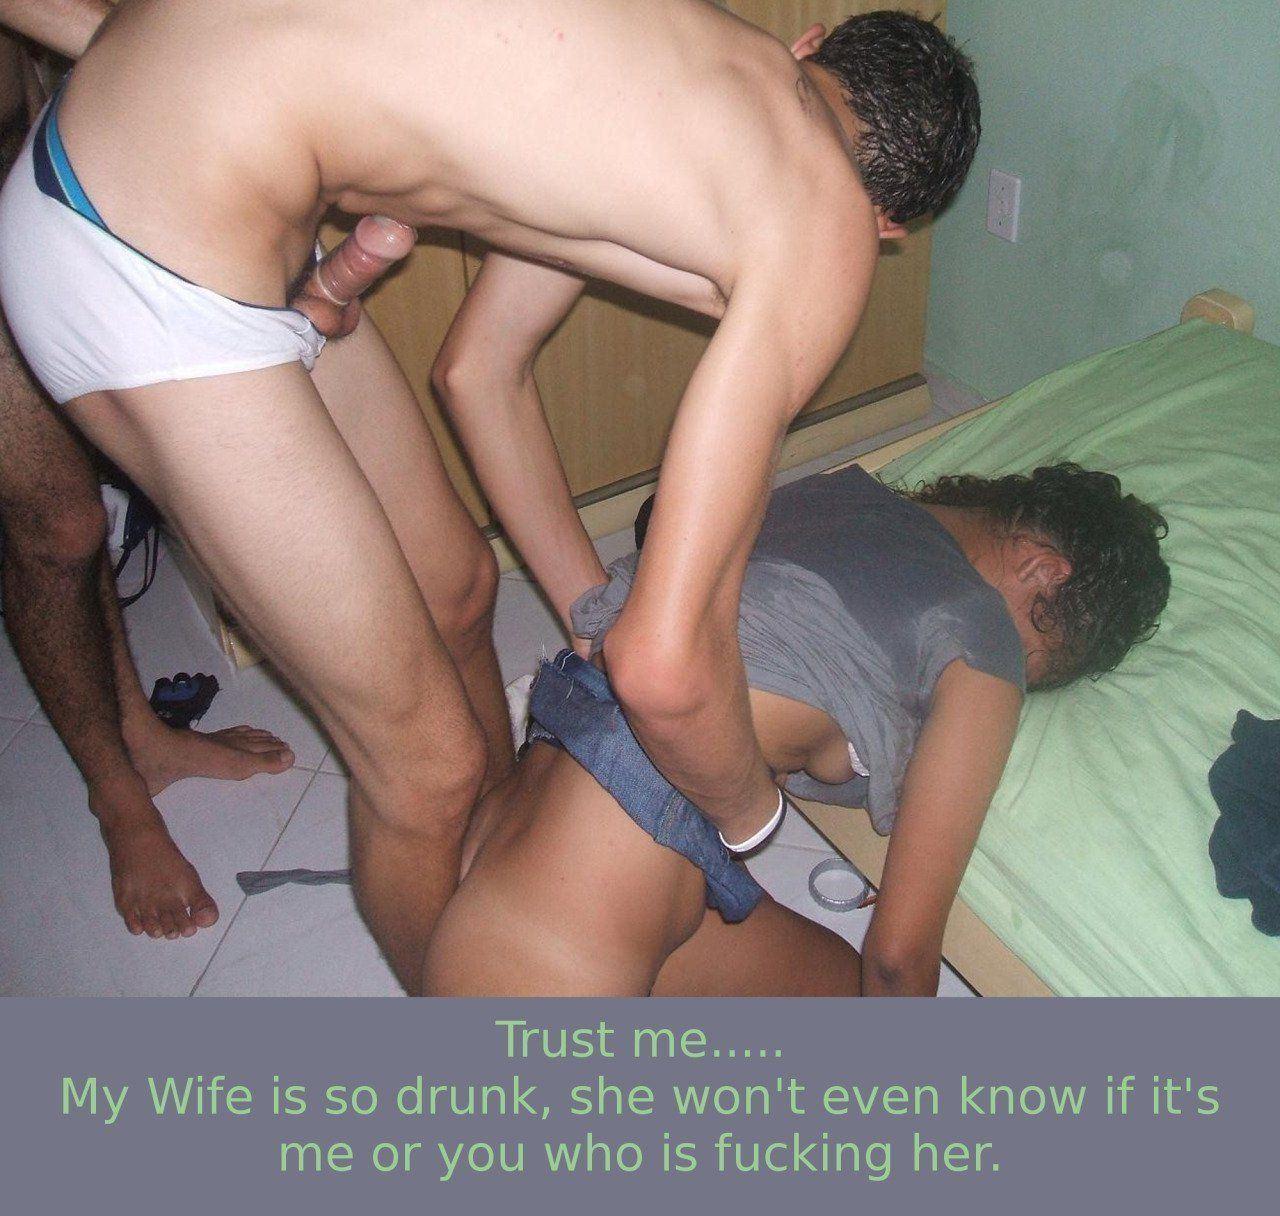 My drunk wife naked party sex Sex best photos free site photo